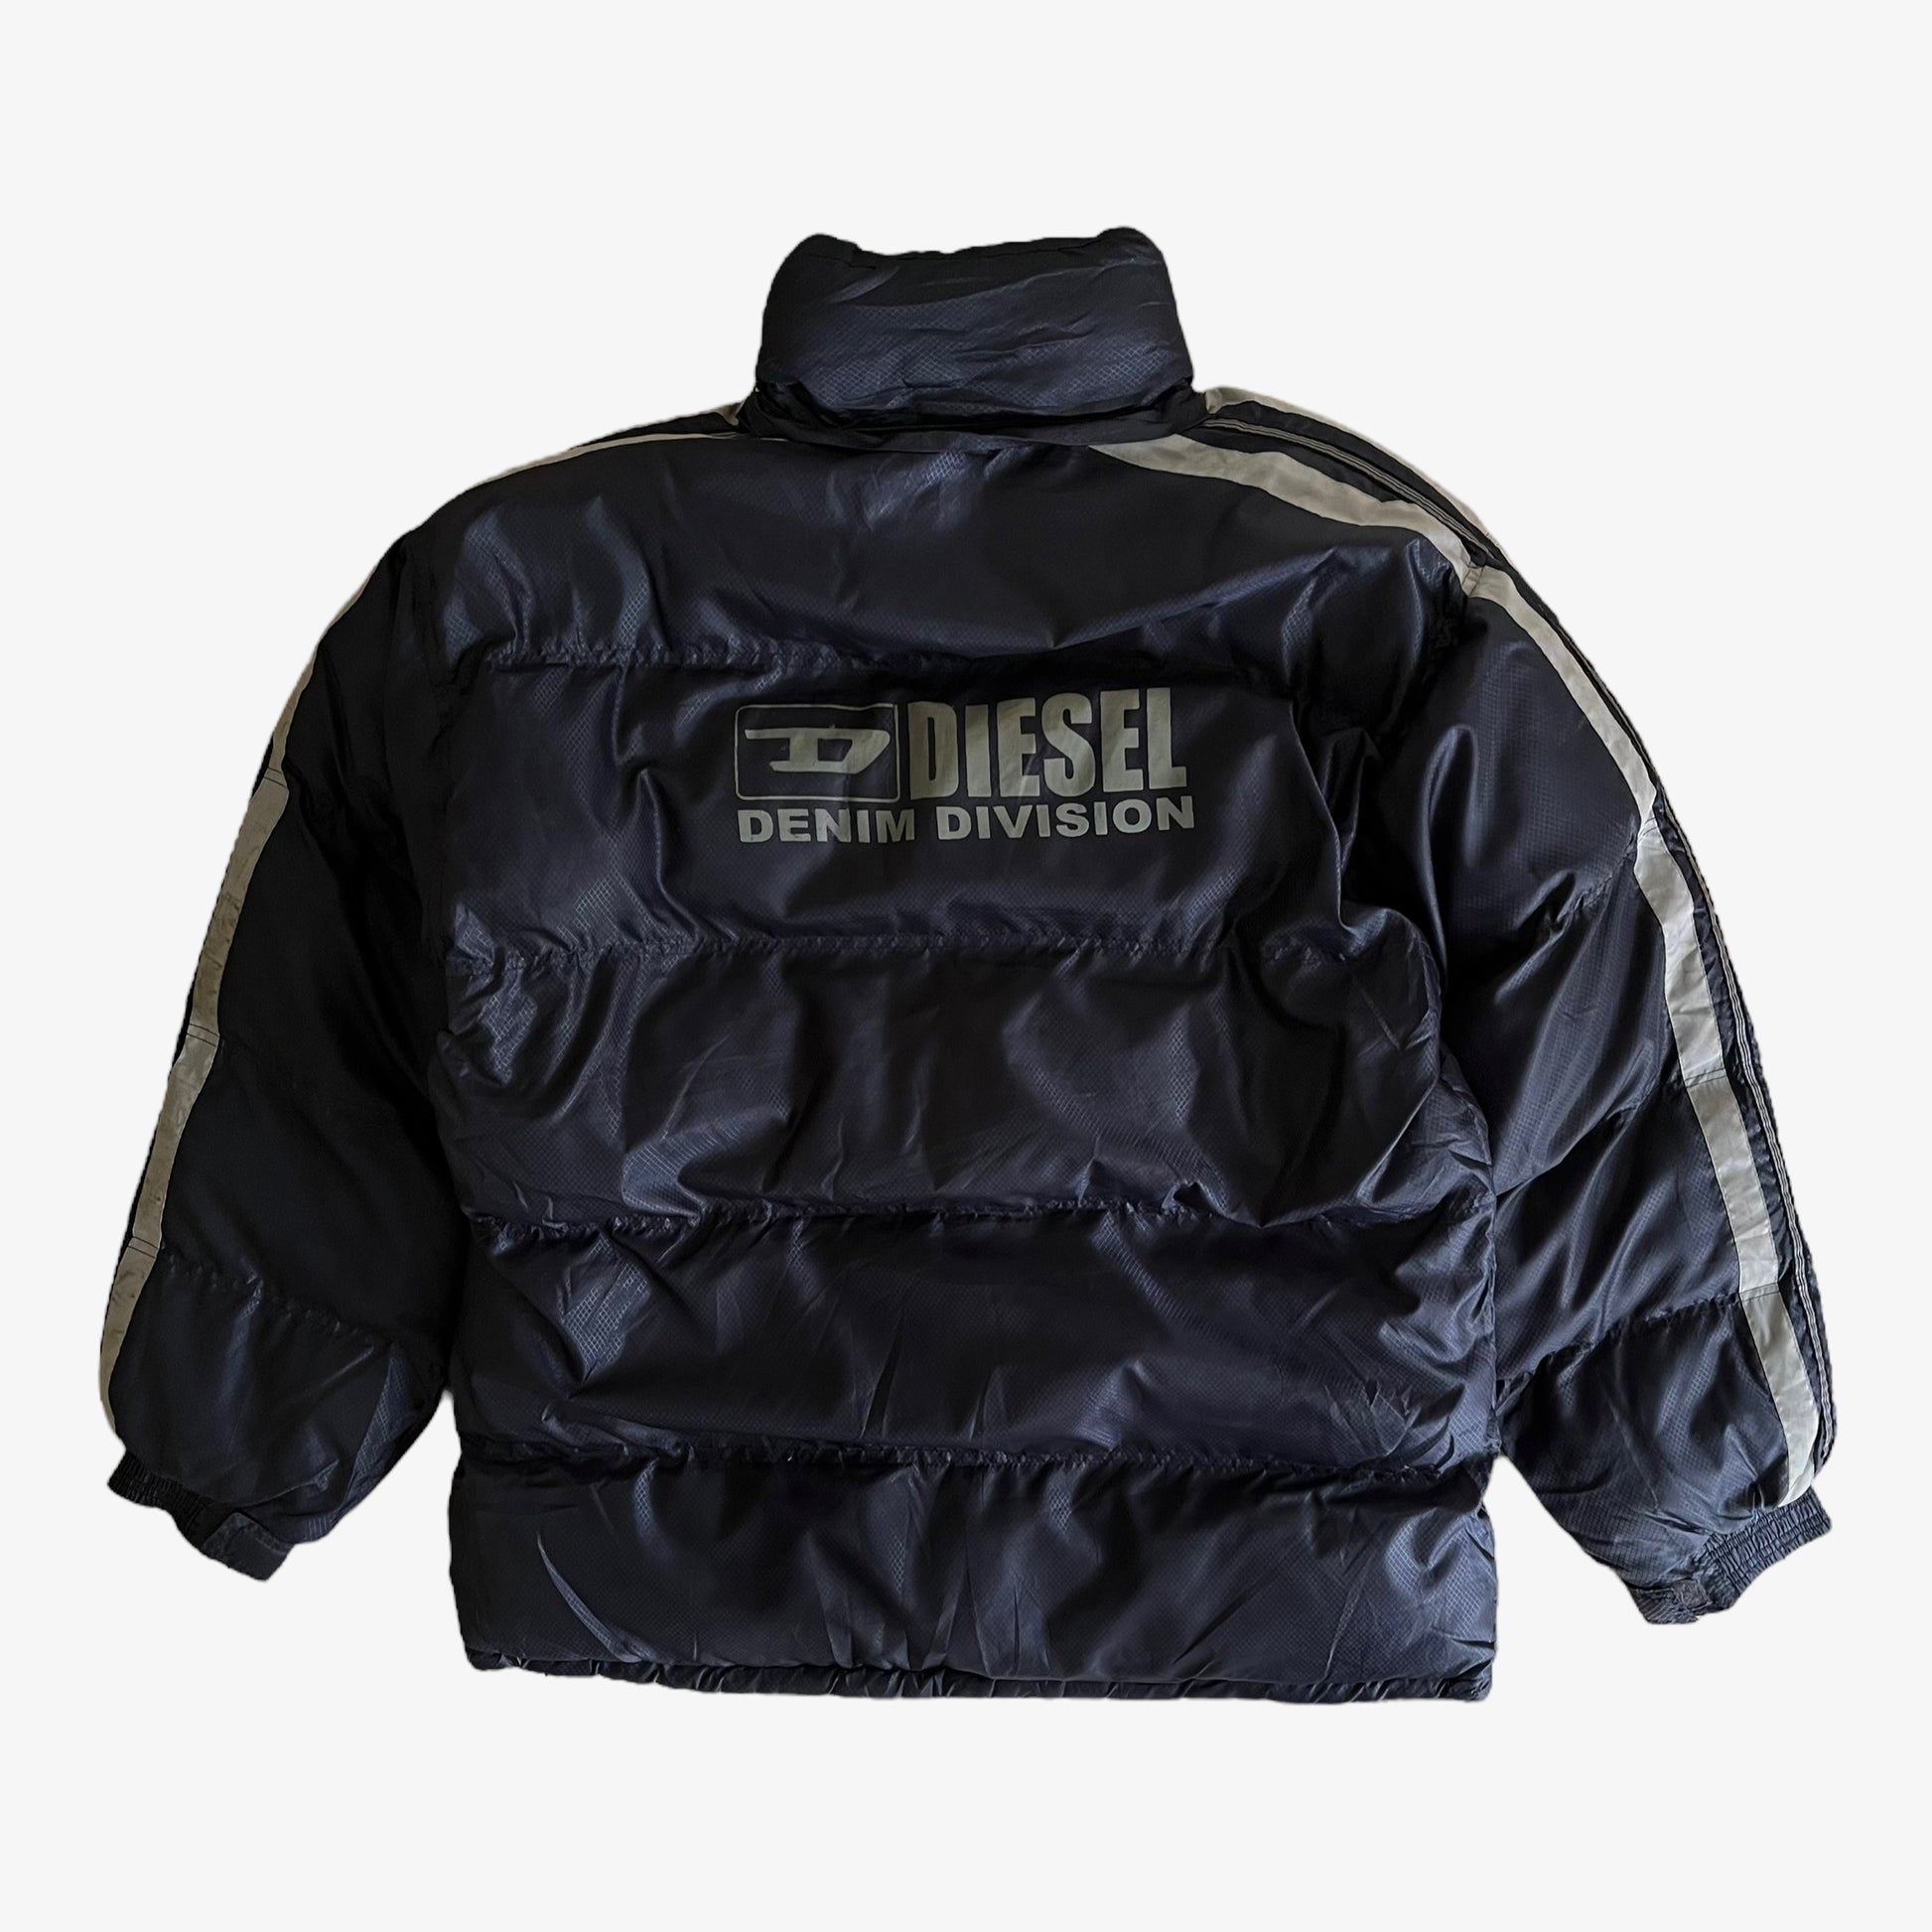 Vintage 90s Diesel Denim Division Puffer Jacket With Back Spell Out Back - Casspios Dream